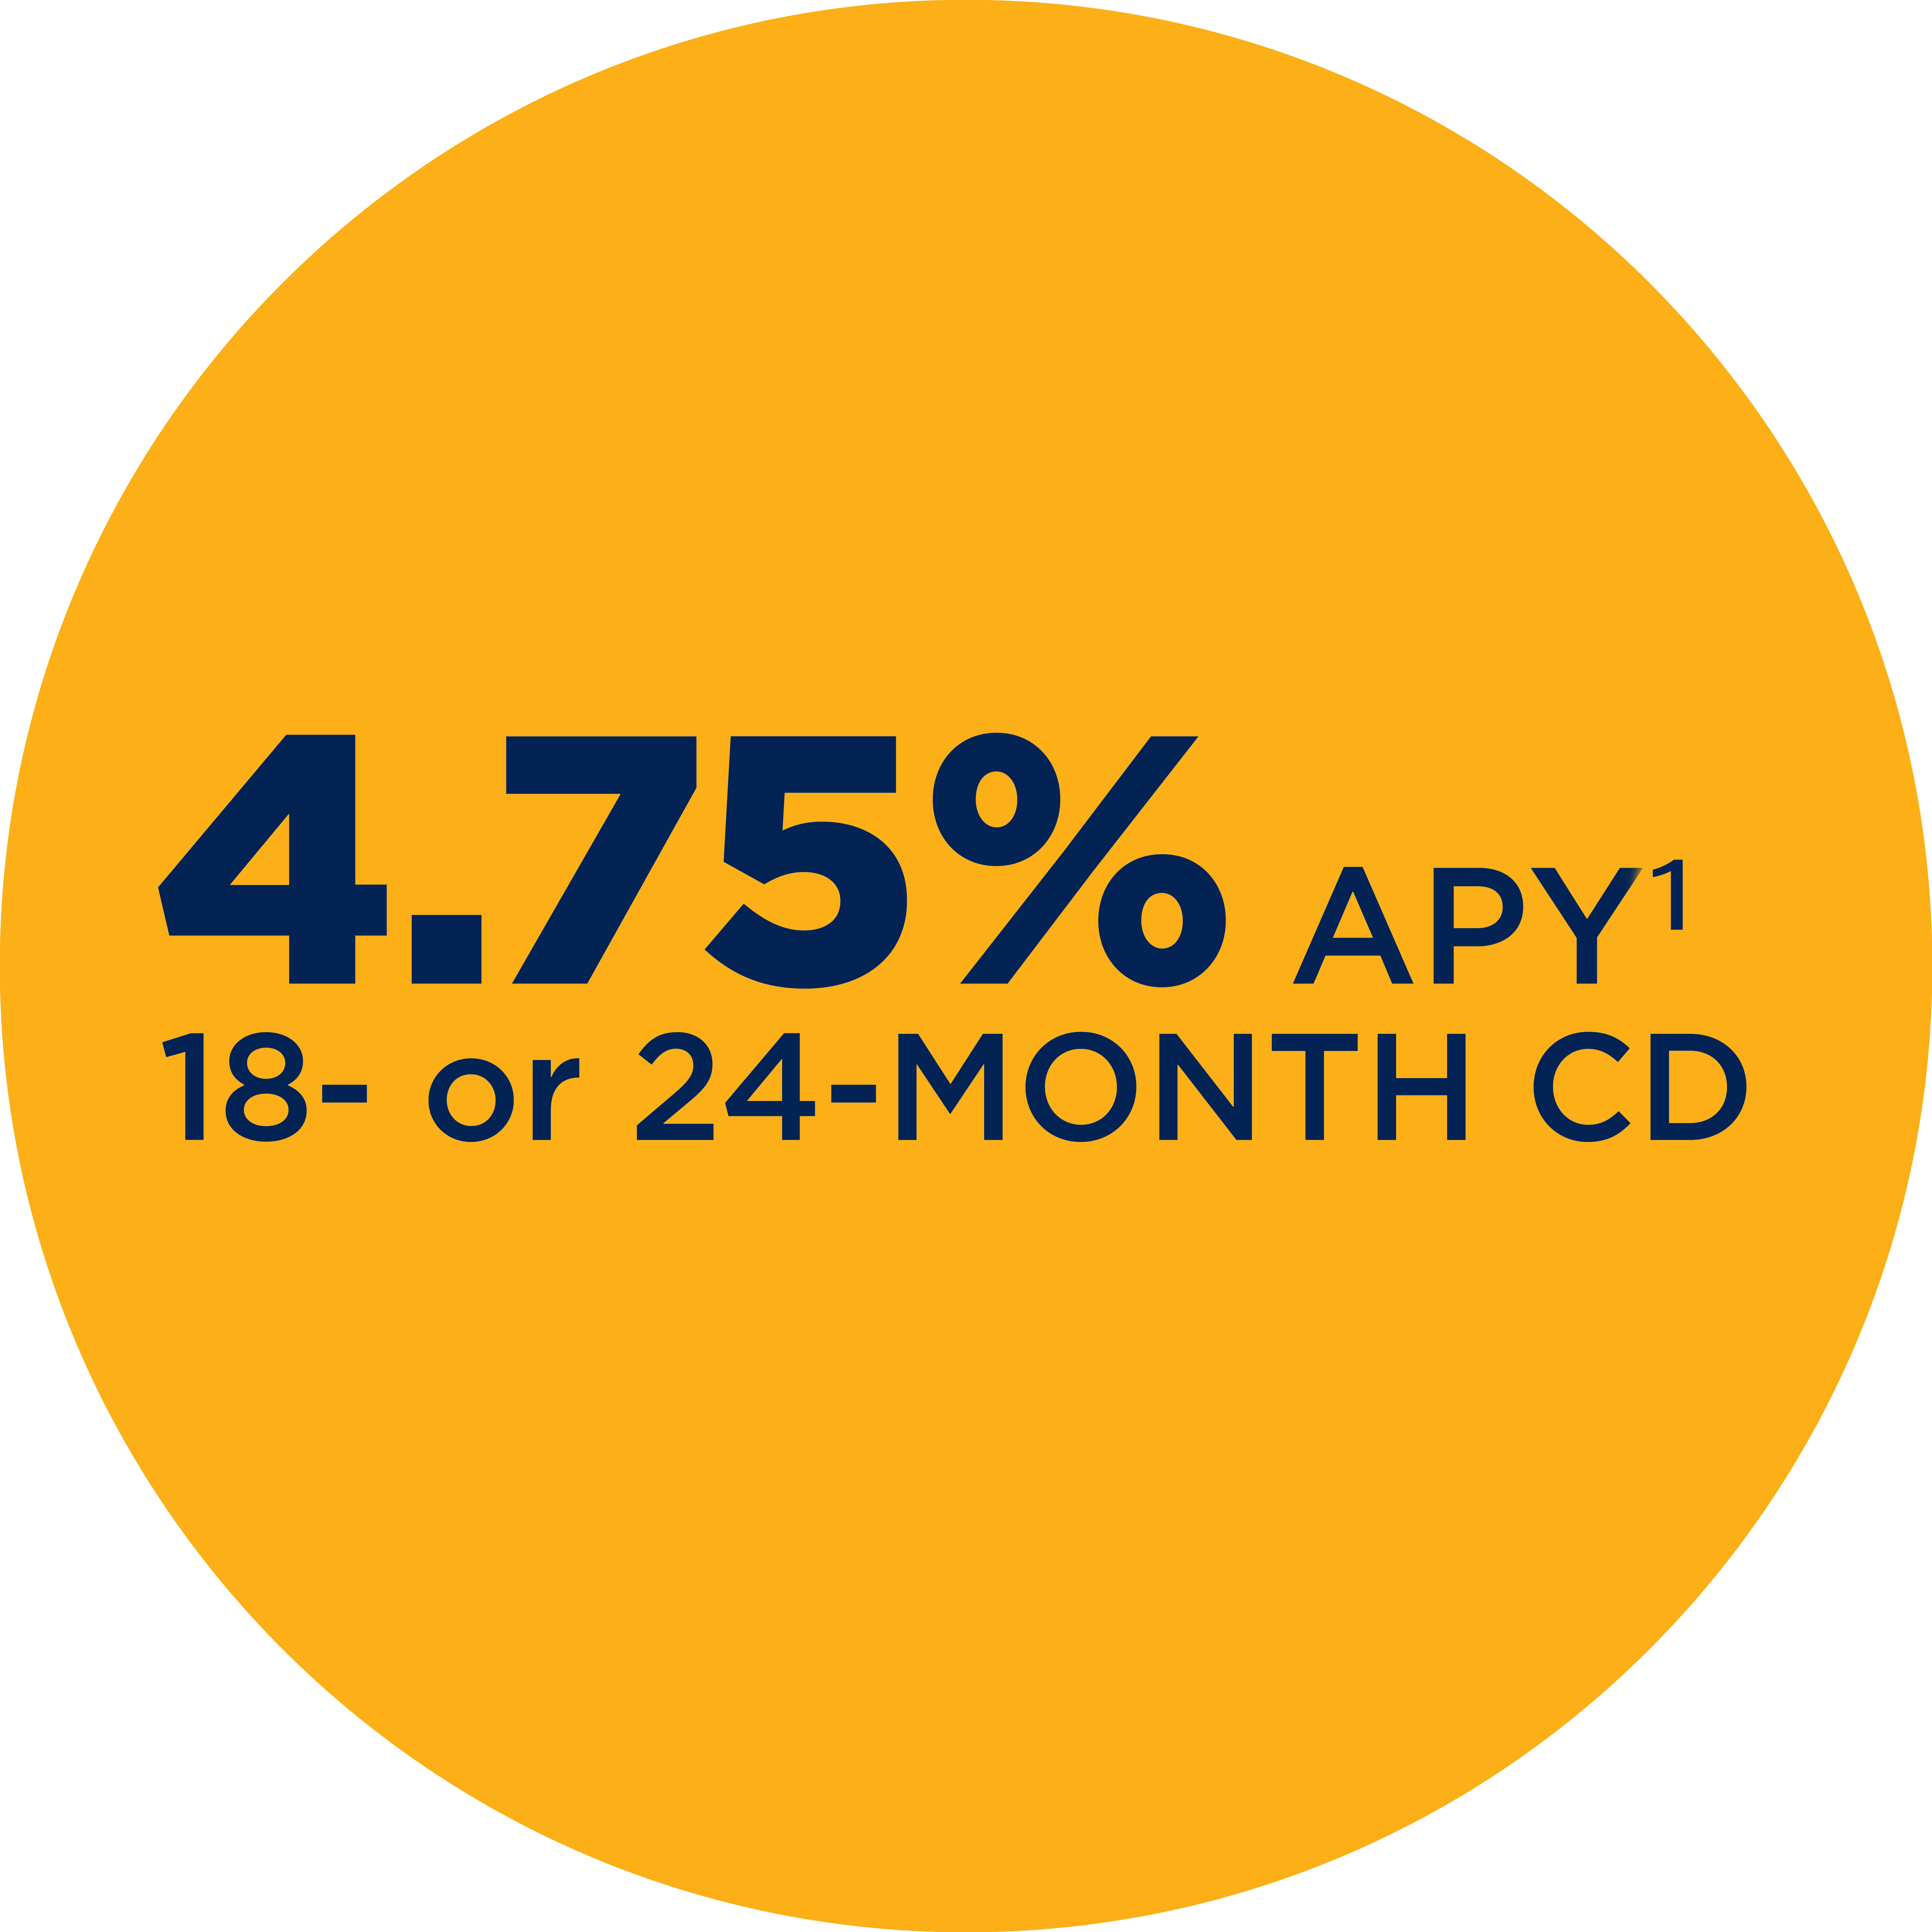 4.75% APY1 18 or 24-month CD